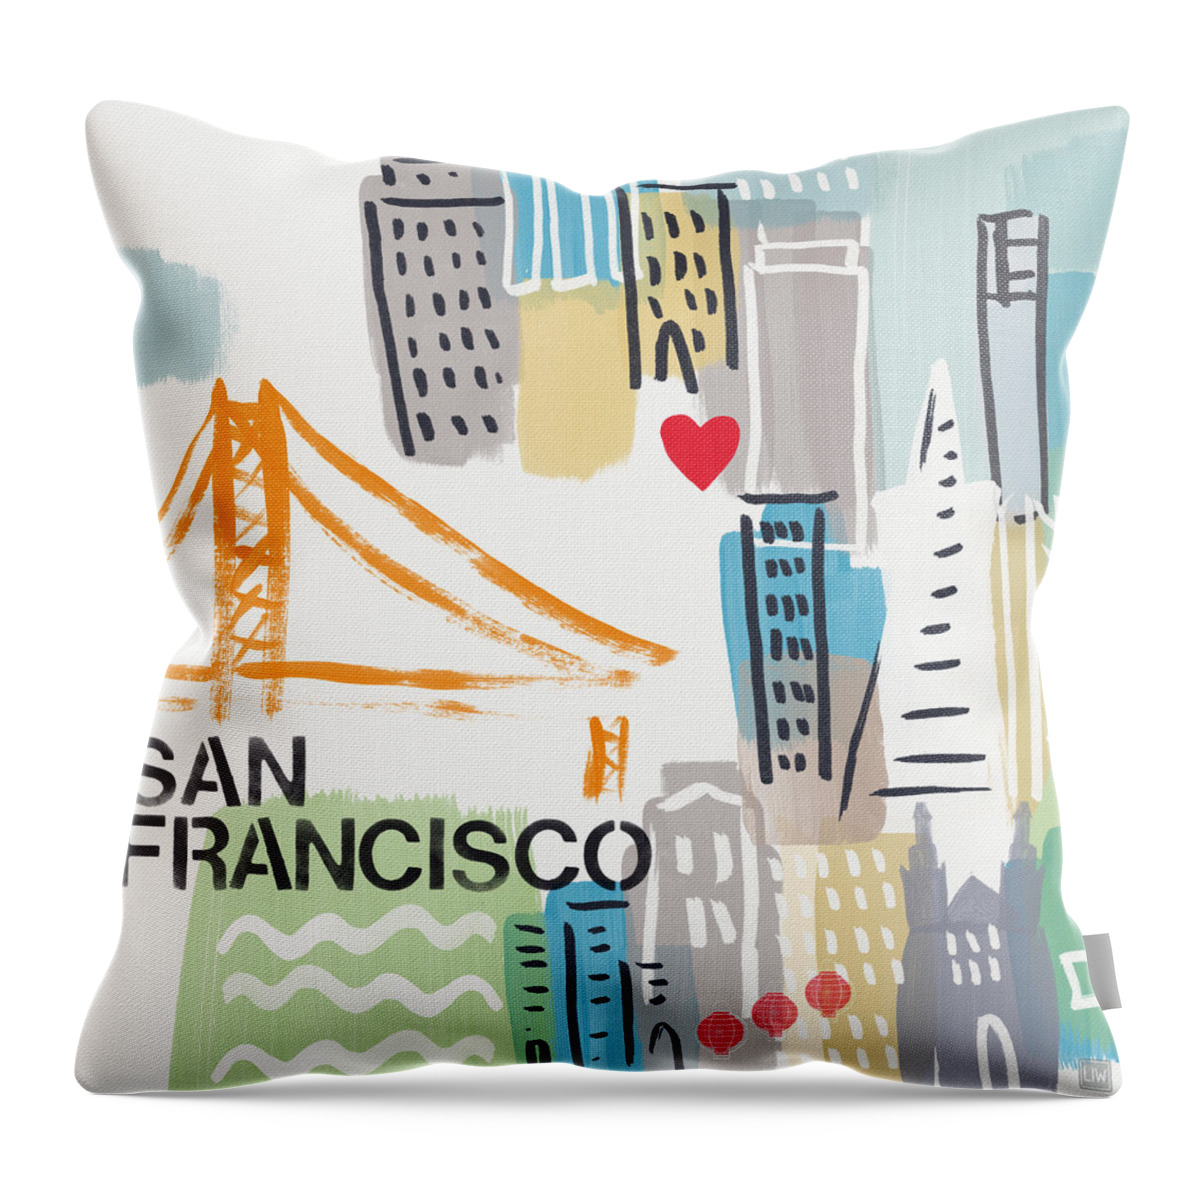 San Francisco Throw Pillow featuring the painting San Francisco Cityscape- Art by Linda Woods by Linda Woods